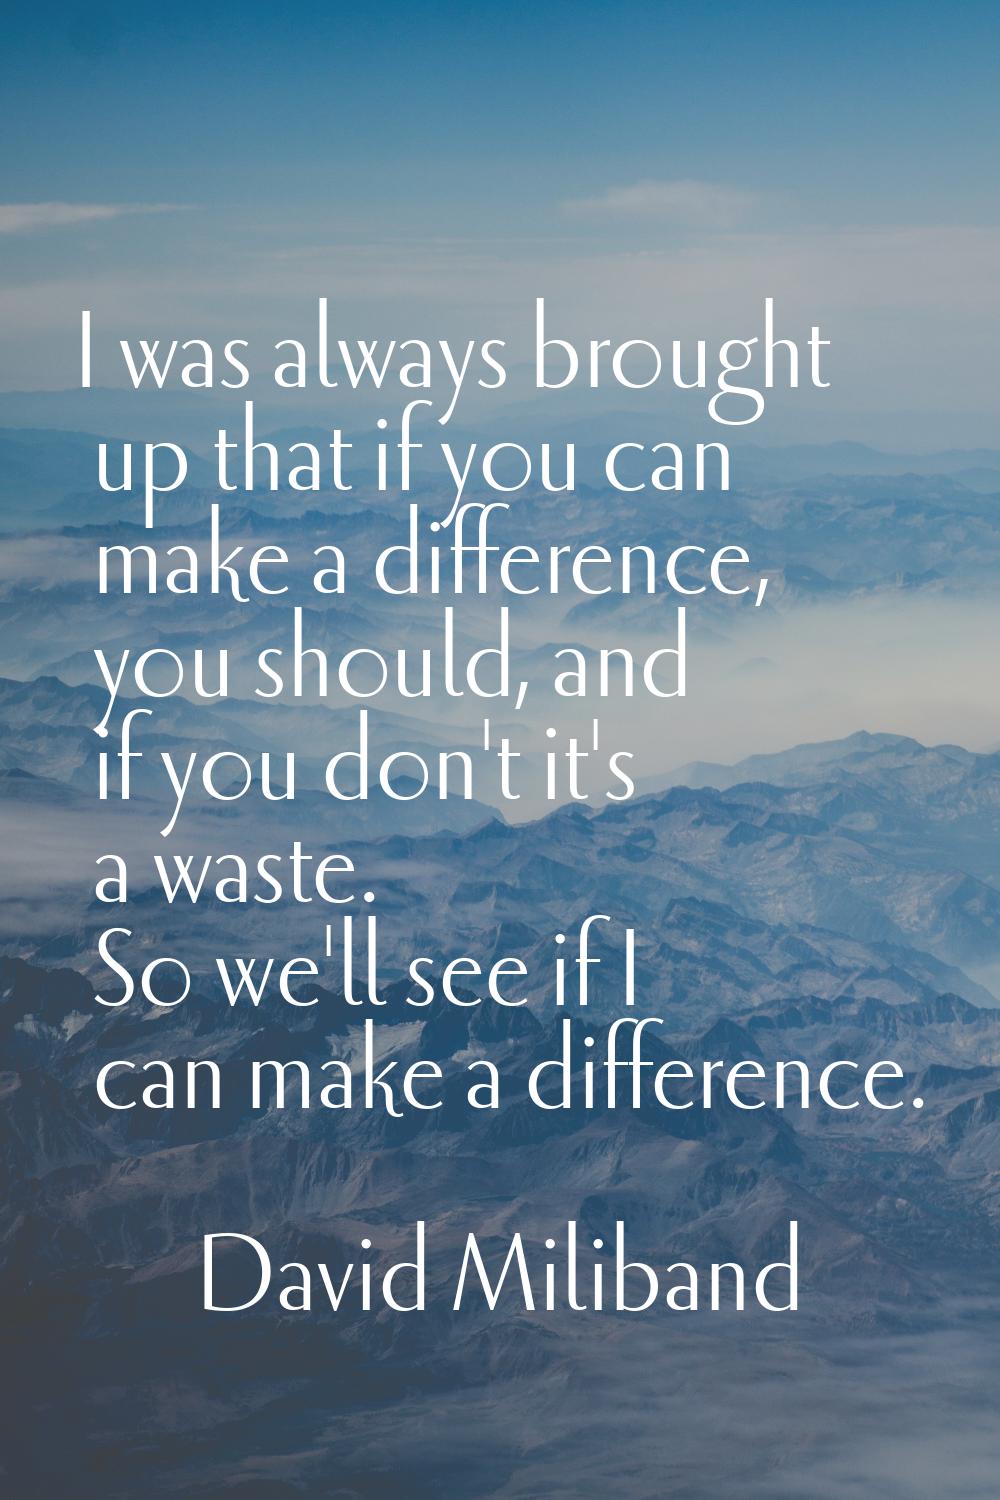 I was always brought up that if you can make a difference, you should, and if you don't it's a wast